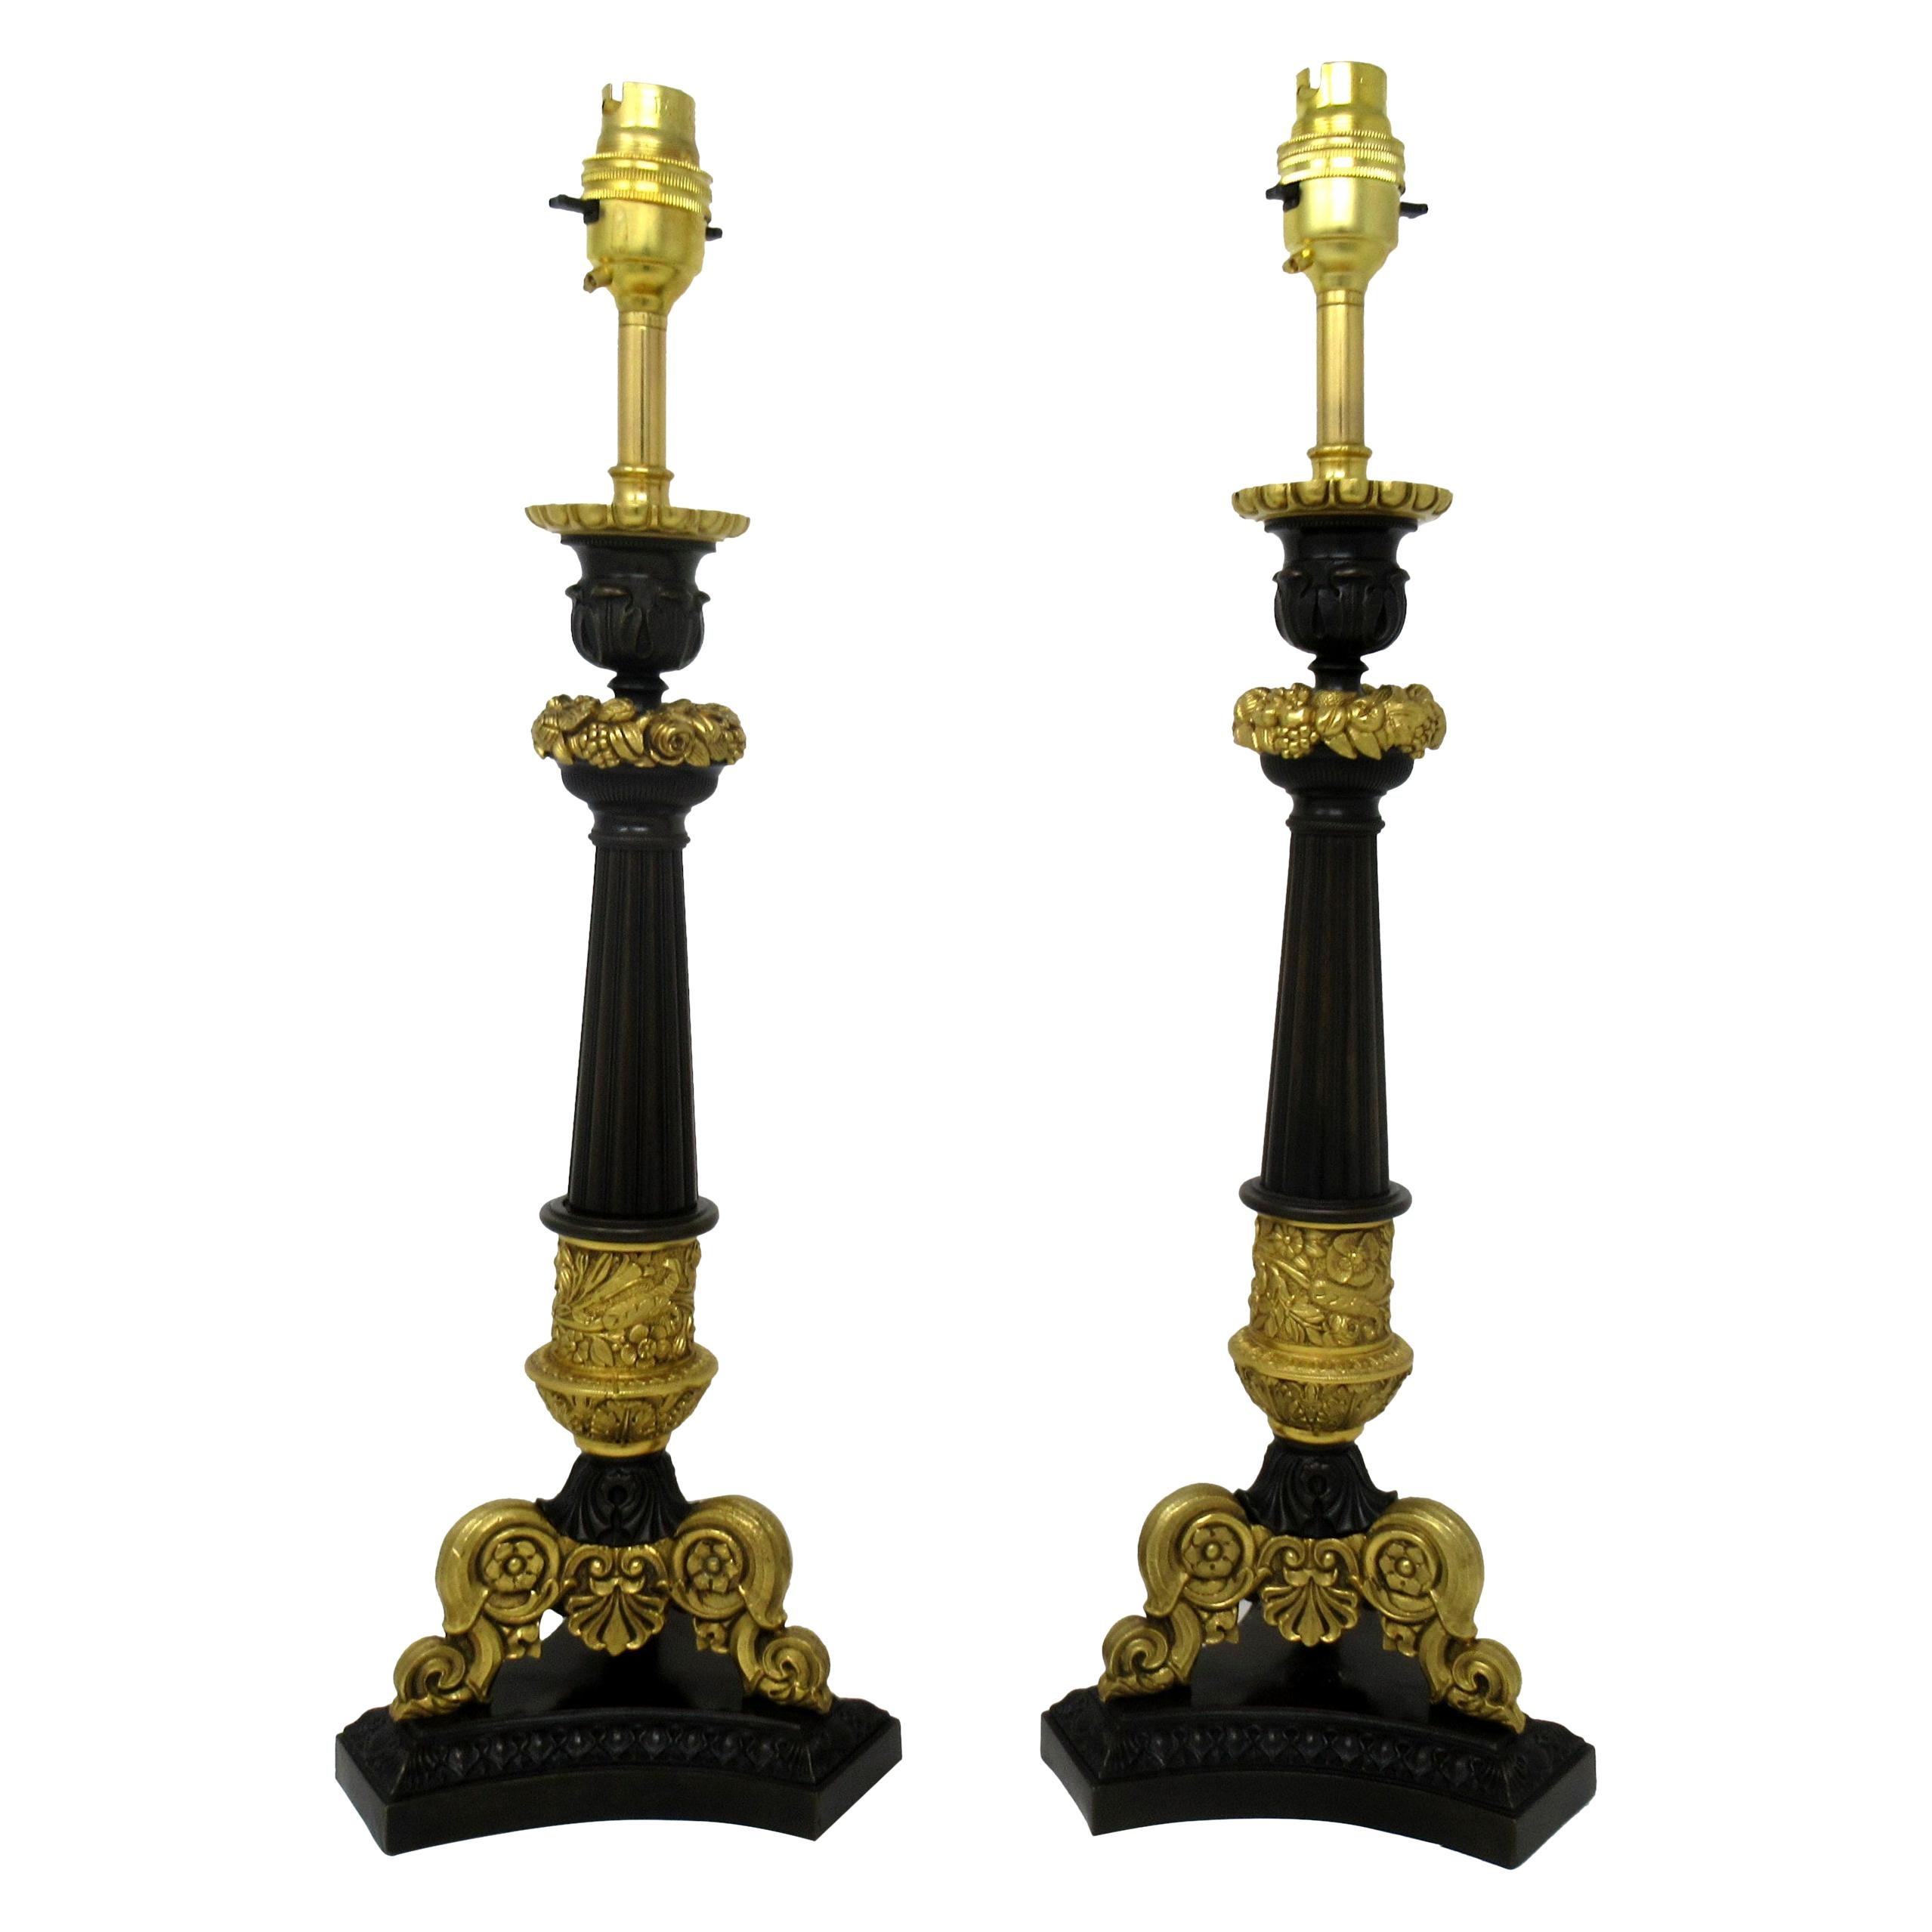 Antique Pair of French Doré Bronze Neoclassical Ormolu Candlestick Lamps